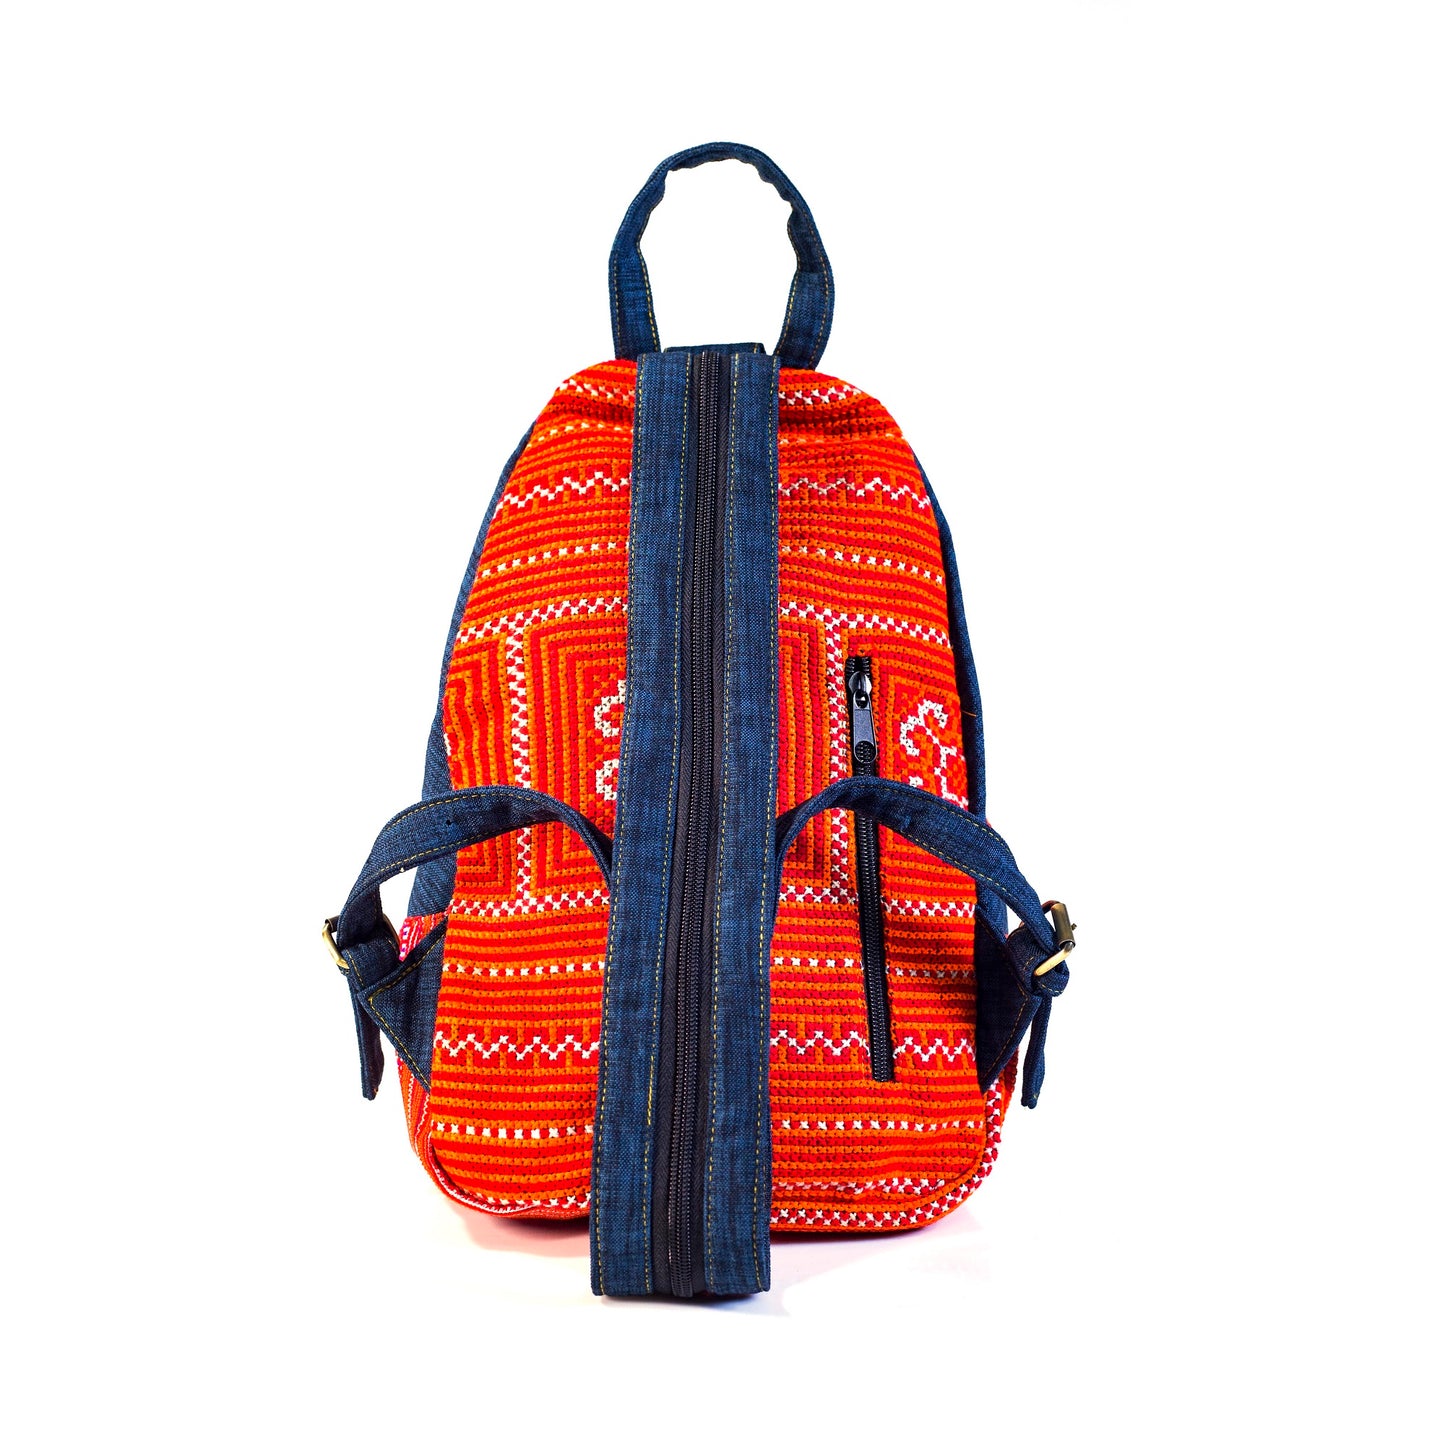 Multi-purpose backpack and sling, red hand-embroidery fabric, blue trim